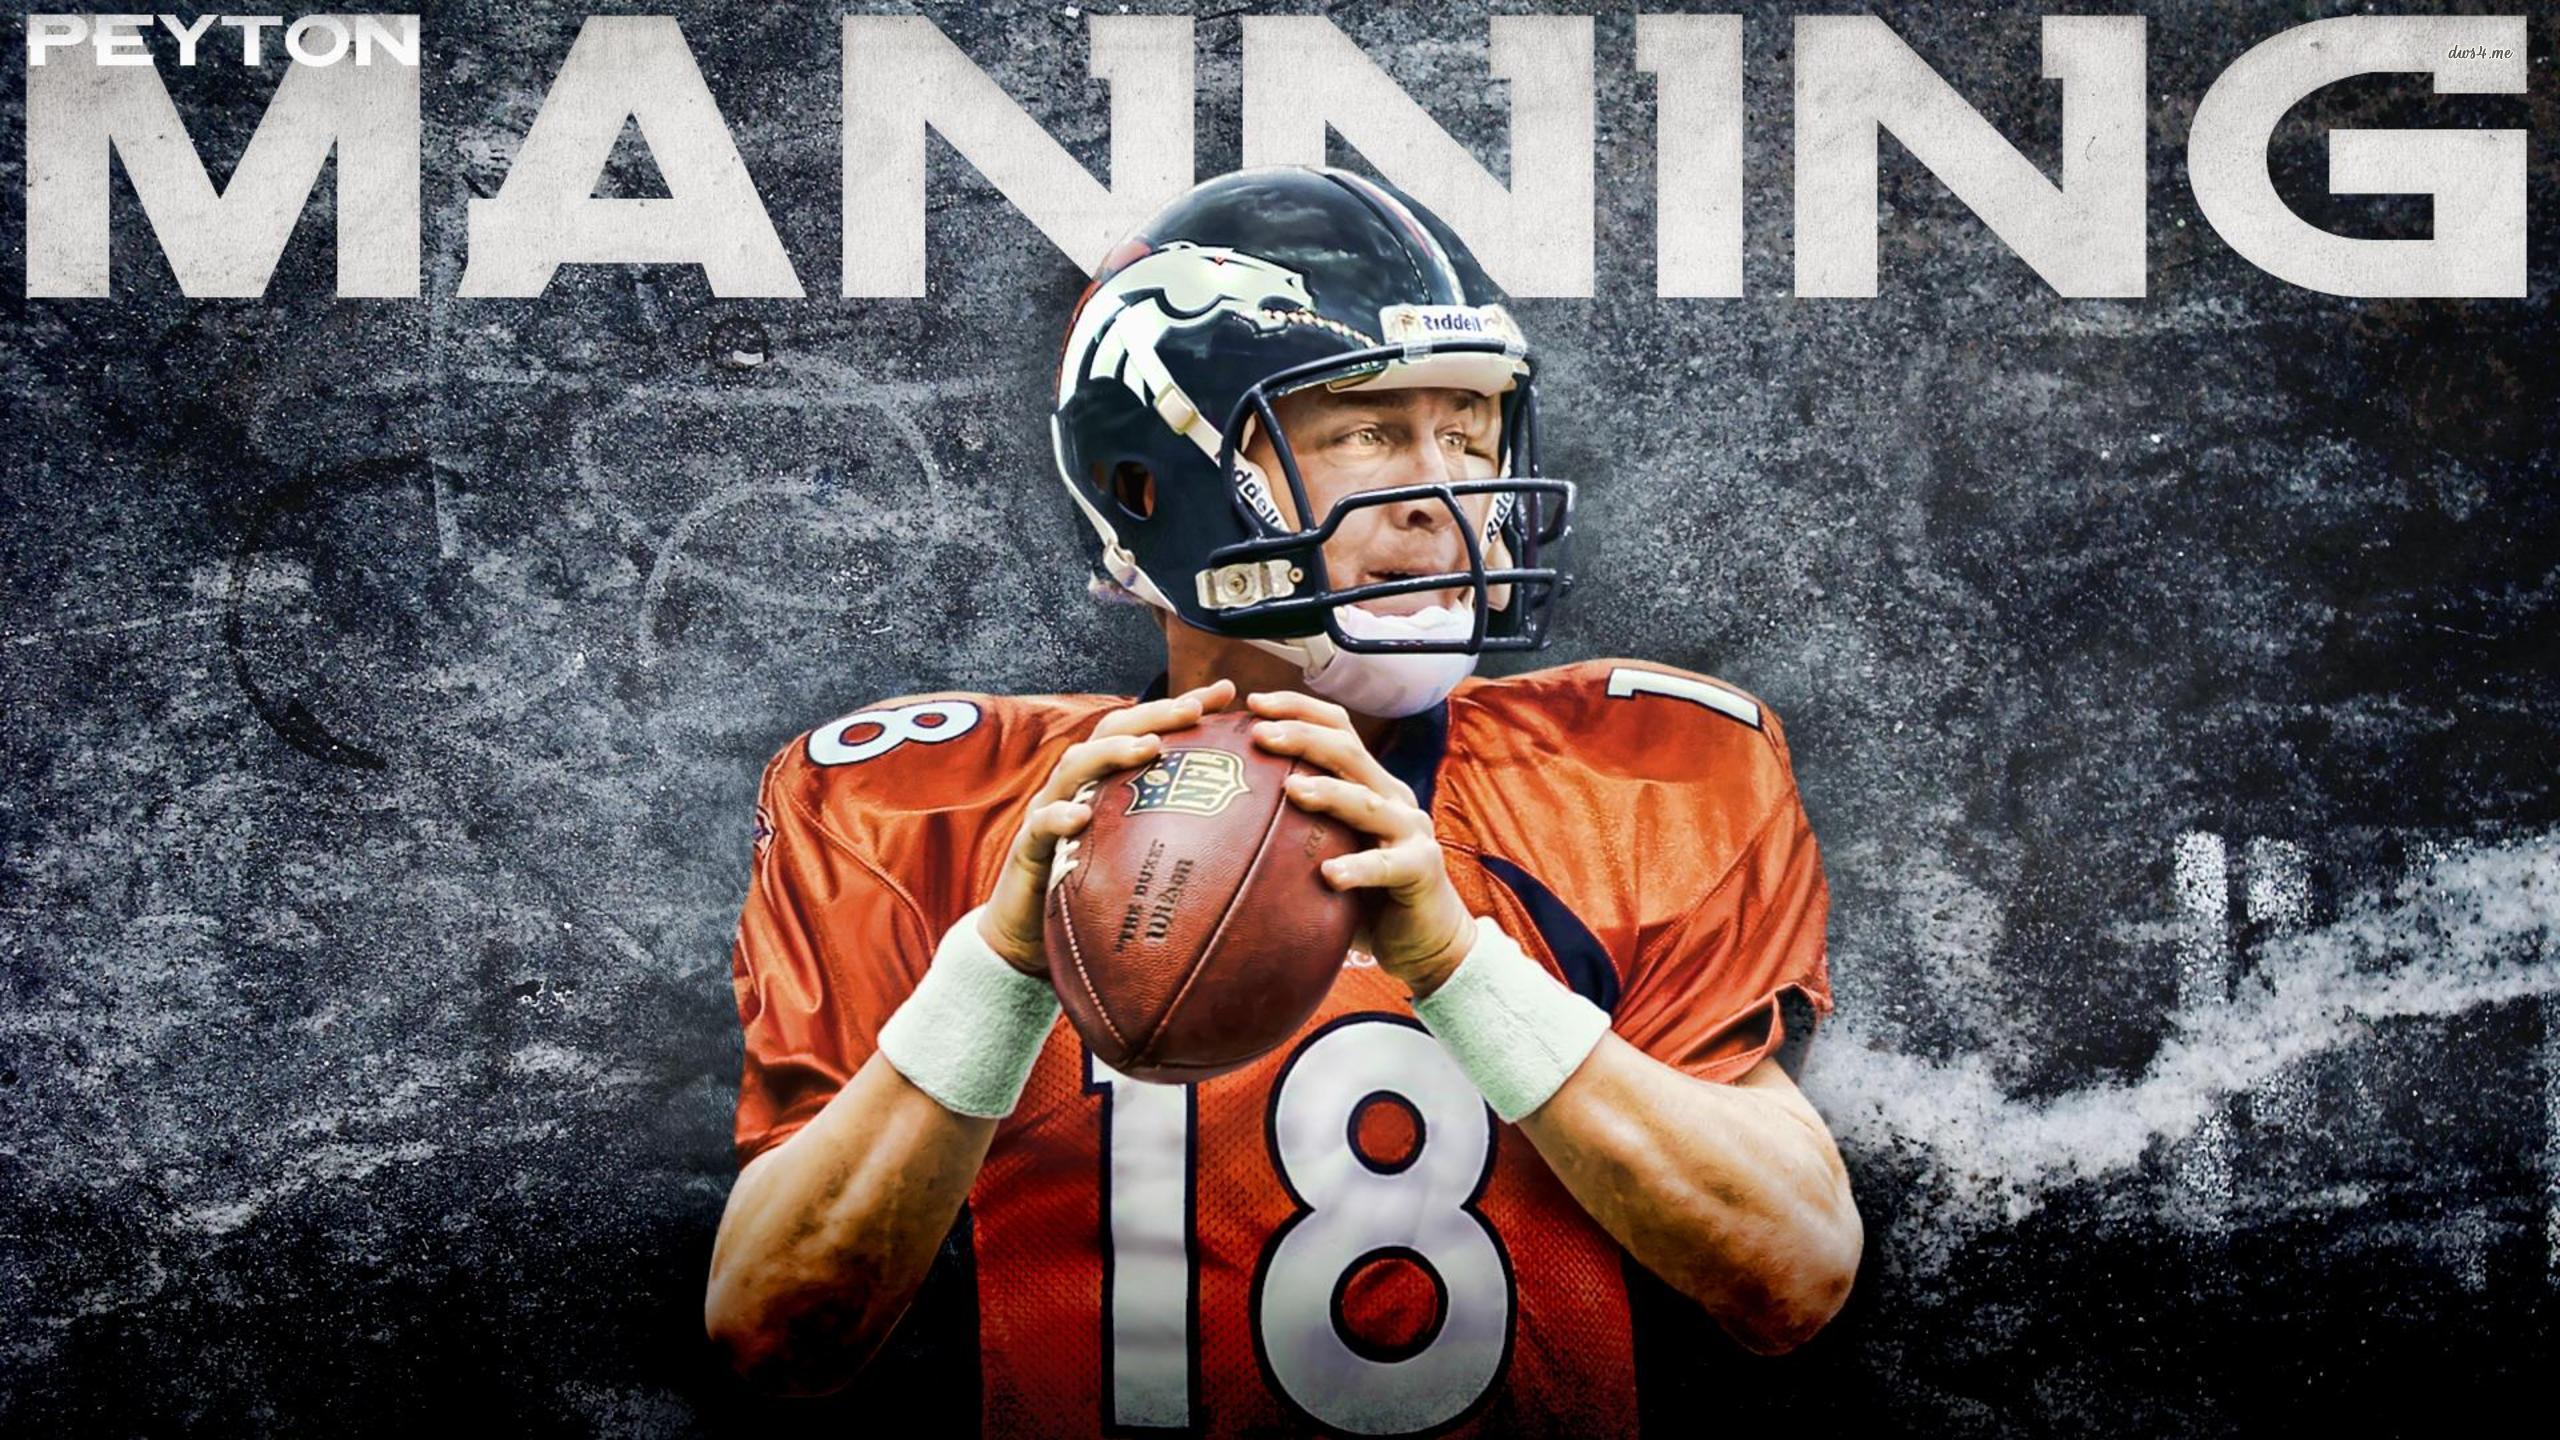 iPhone 5 Peyton Manning Wallpaper I made iPhone 4 wallpaper in comments   rDenverBroncos